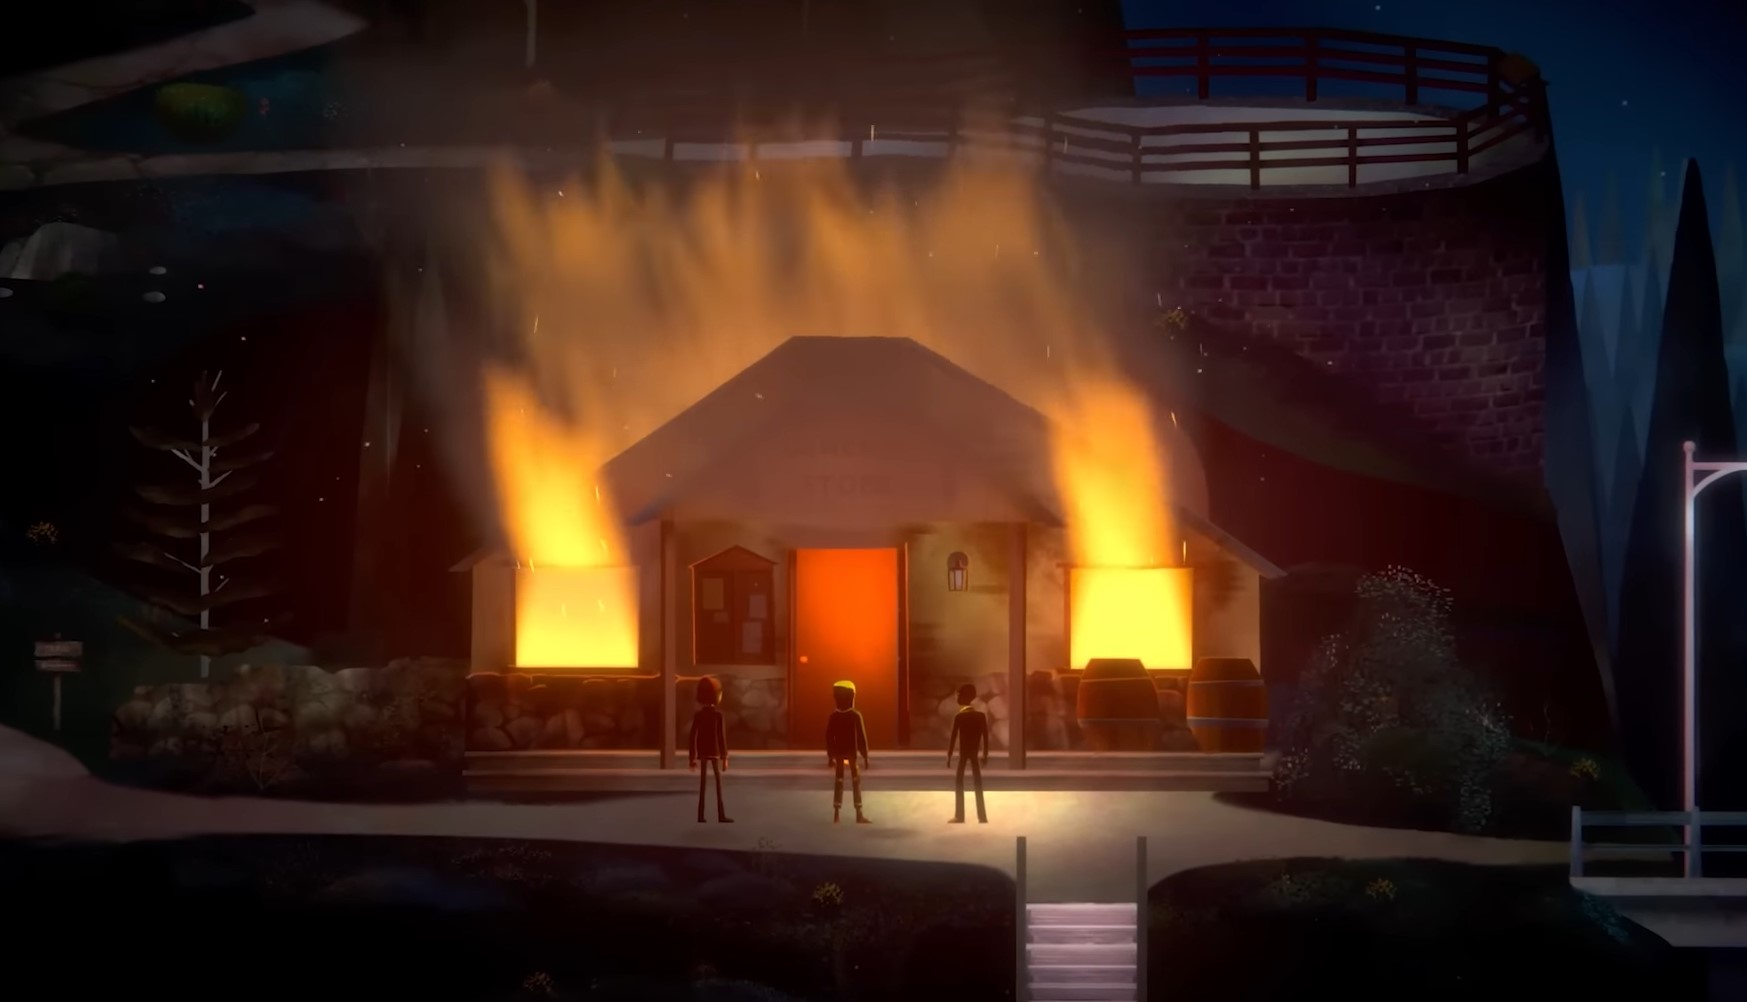 Oxenfree 2 Lost Signals release date, trailer, story - three characters in front of burning house